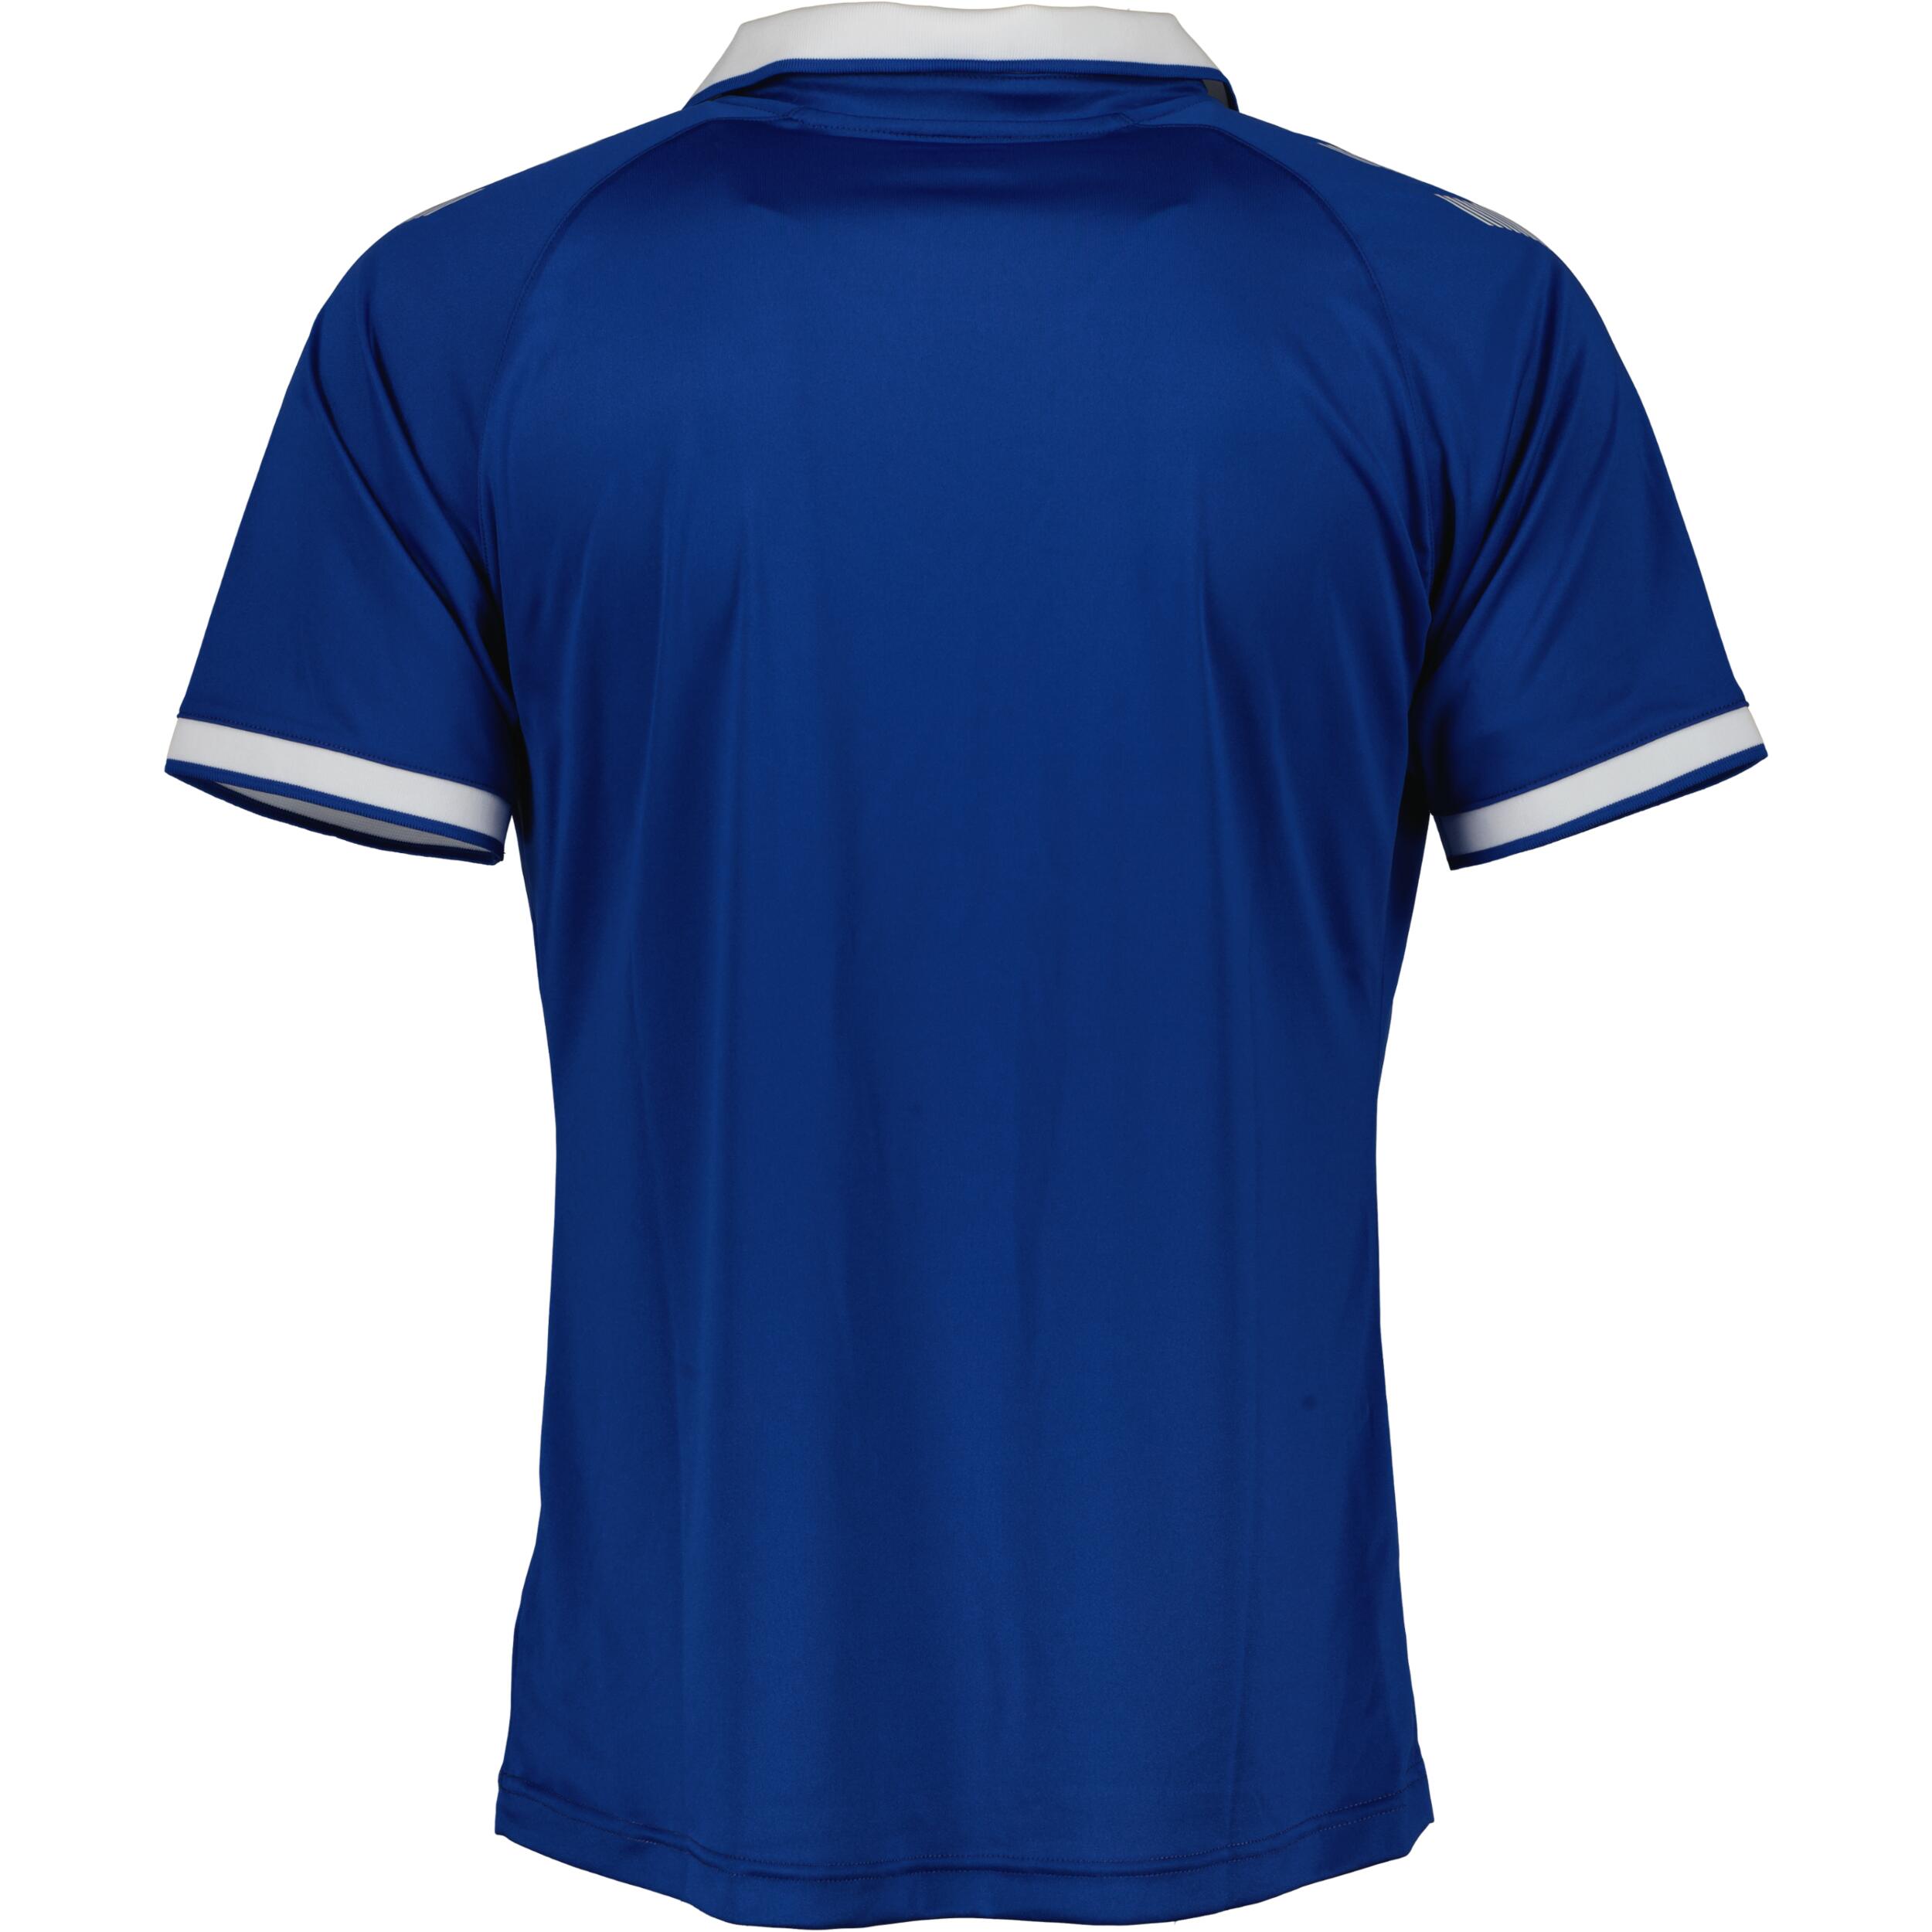 Impact jersey for juniors, great for football, in blue/white 2/3